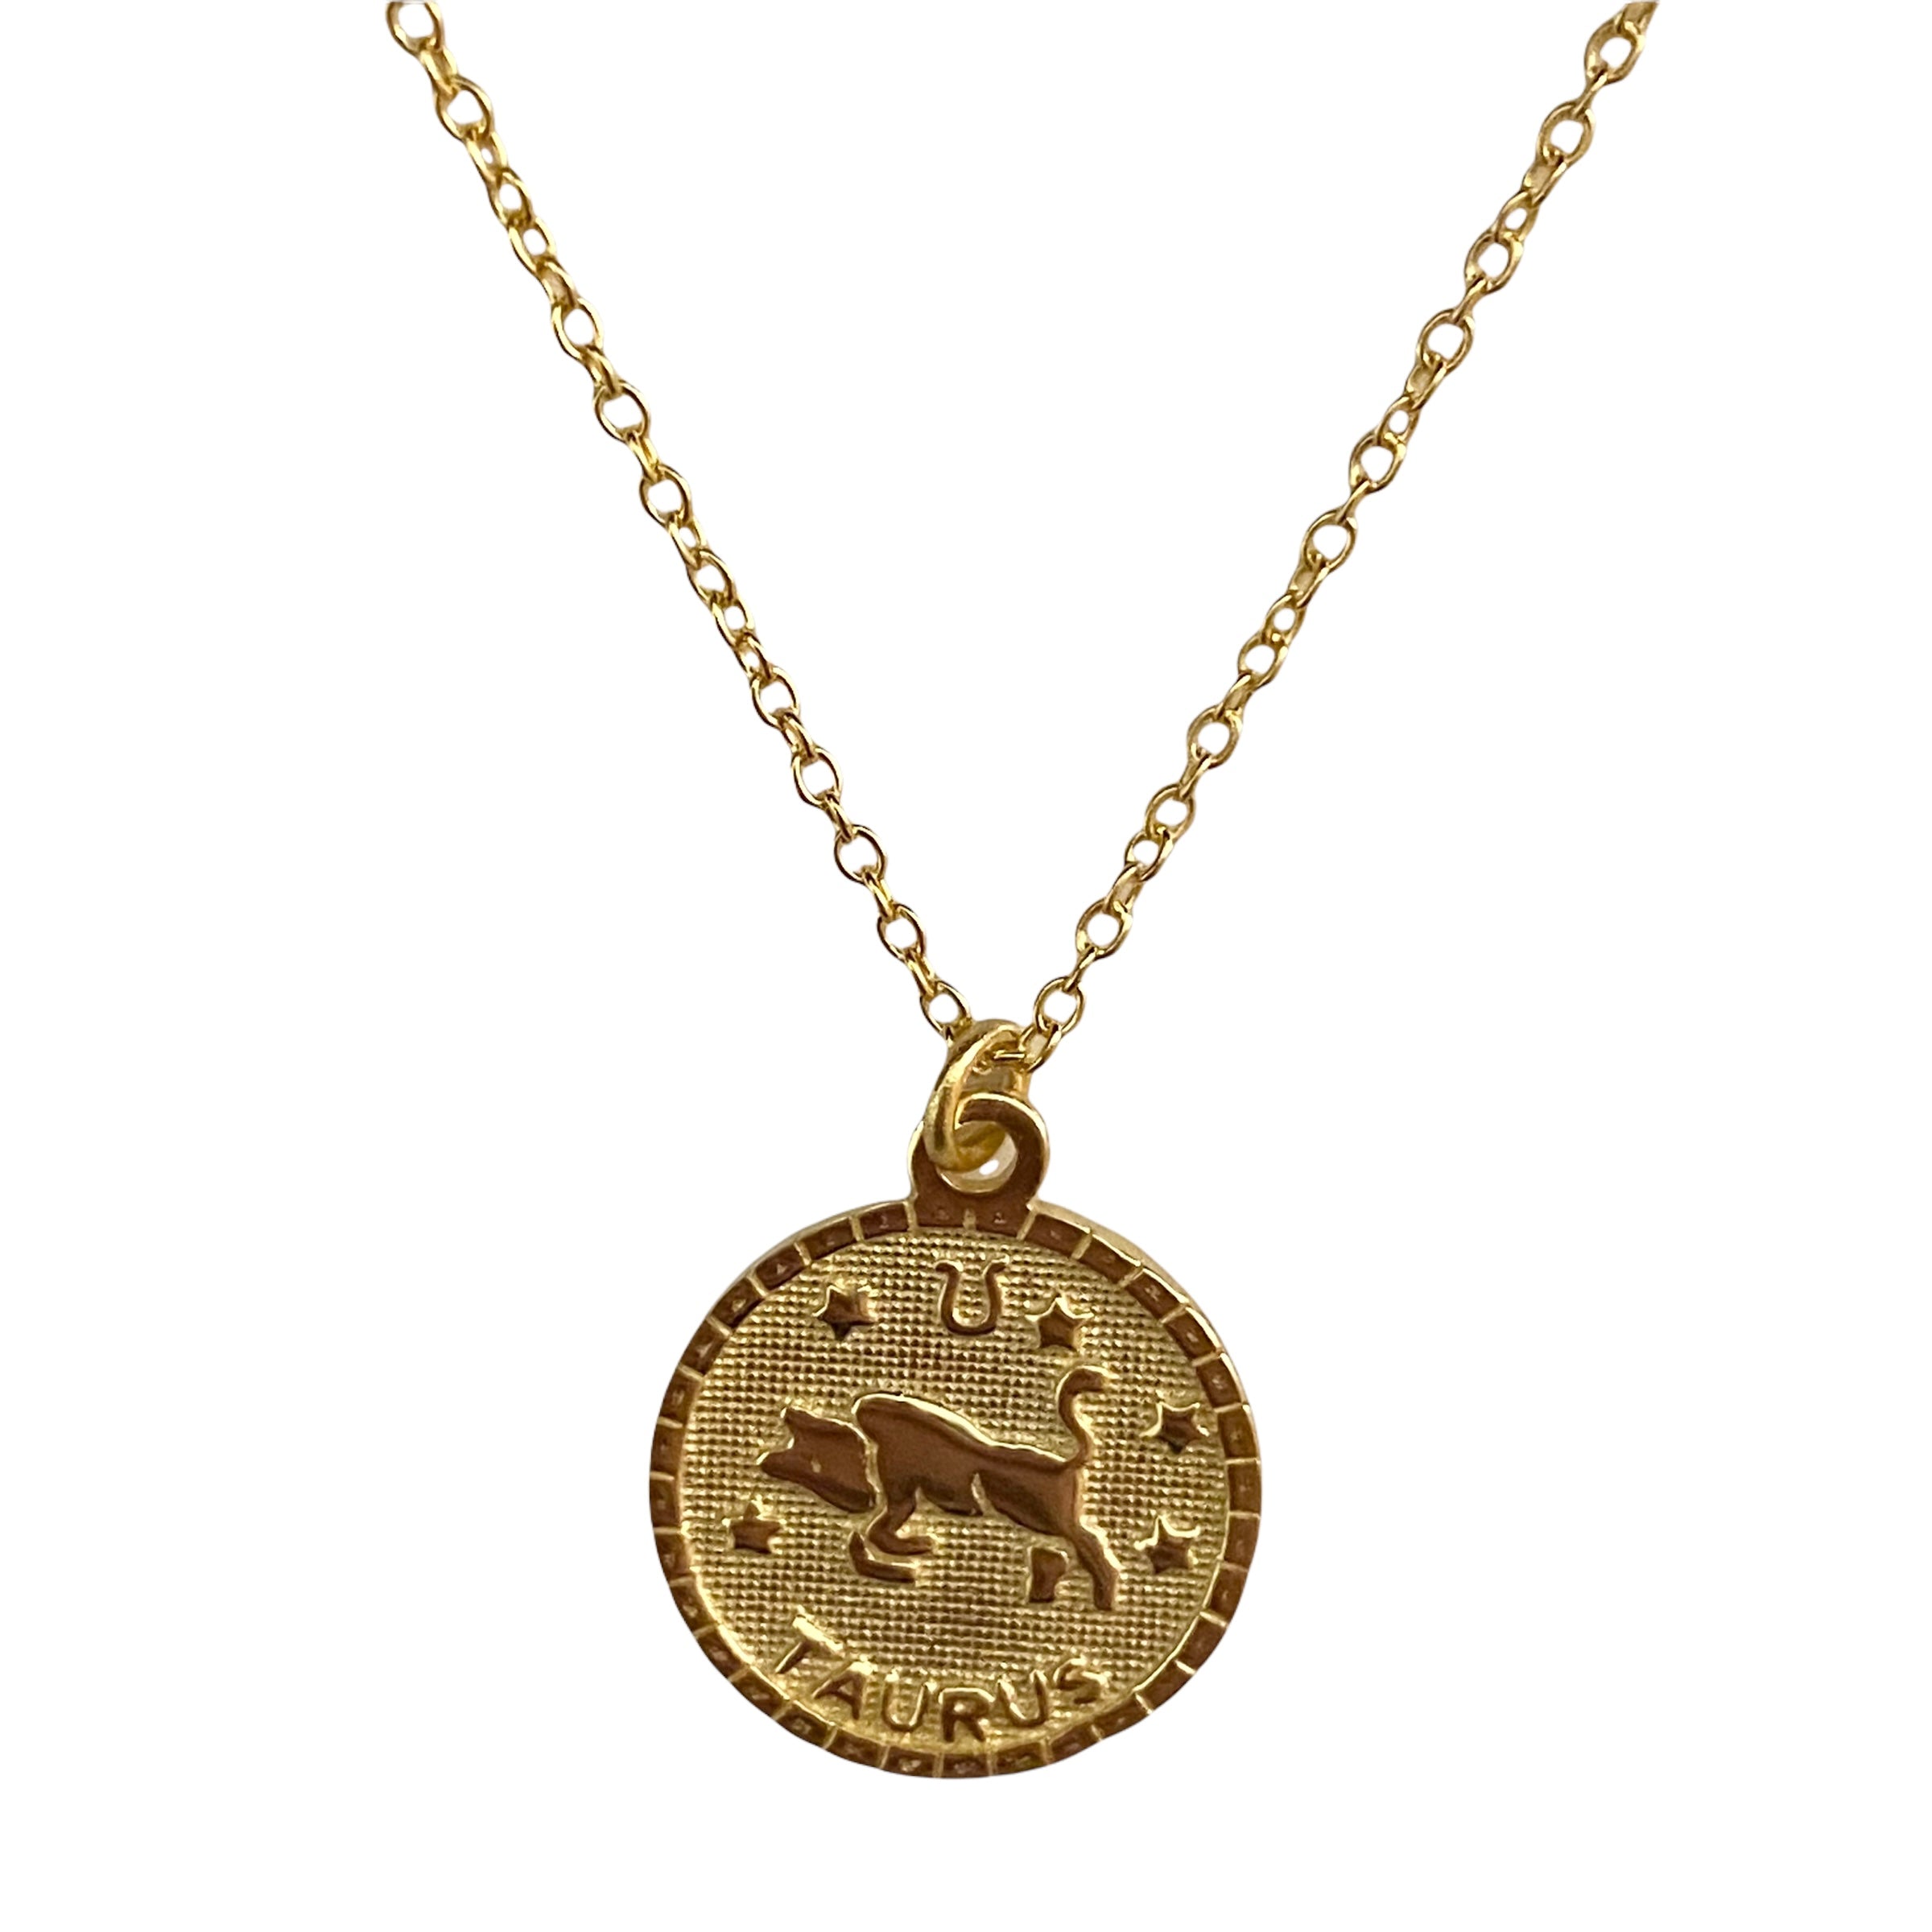 Engraved Sterling Silver Taurus Zodiac Necklace By Lily Charmed |  notonthehighstreet.com